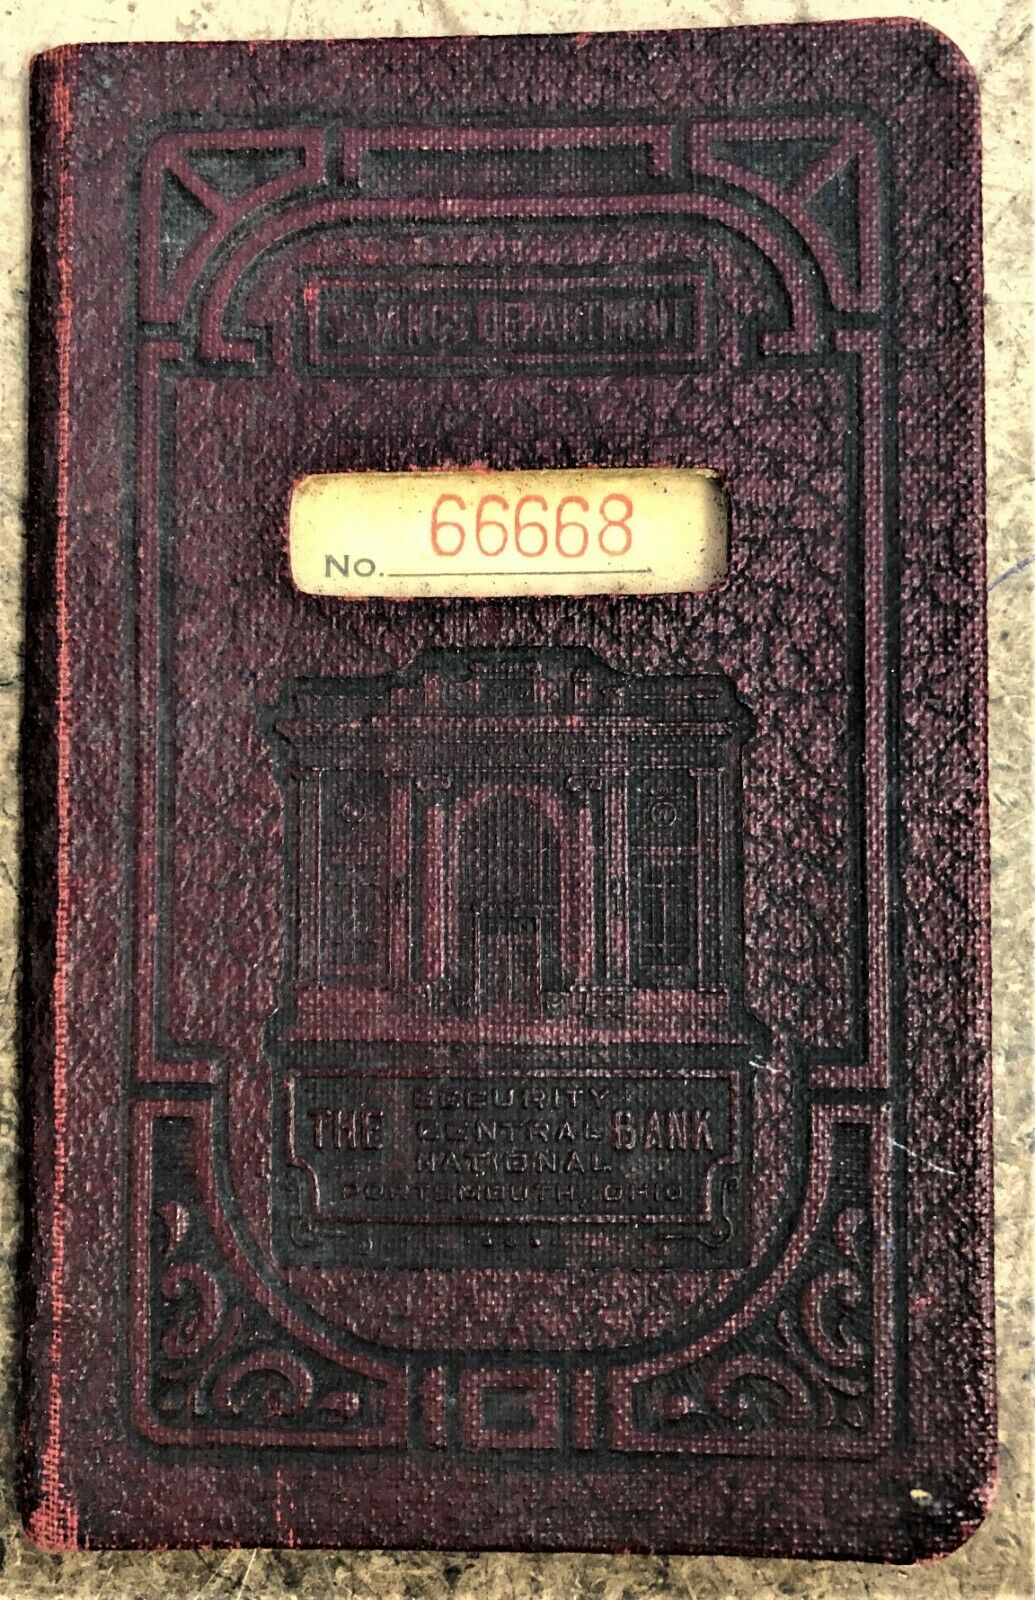 The SECURITY CENTRAL NATIONAL BANK  |  PORTSMOUTH  |  OH EMBOSSED COVER BANK BOOK